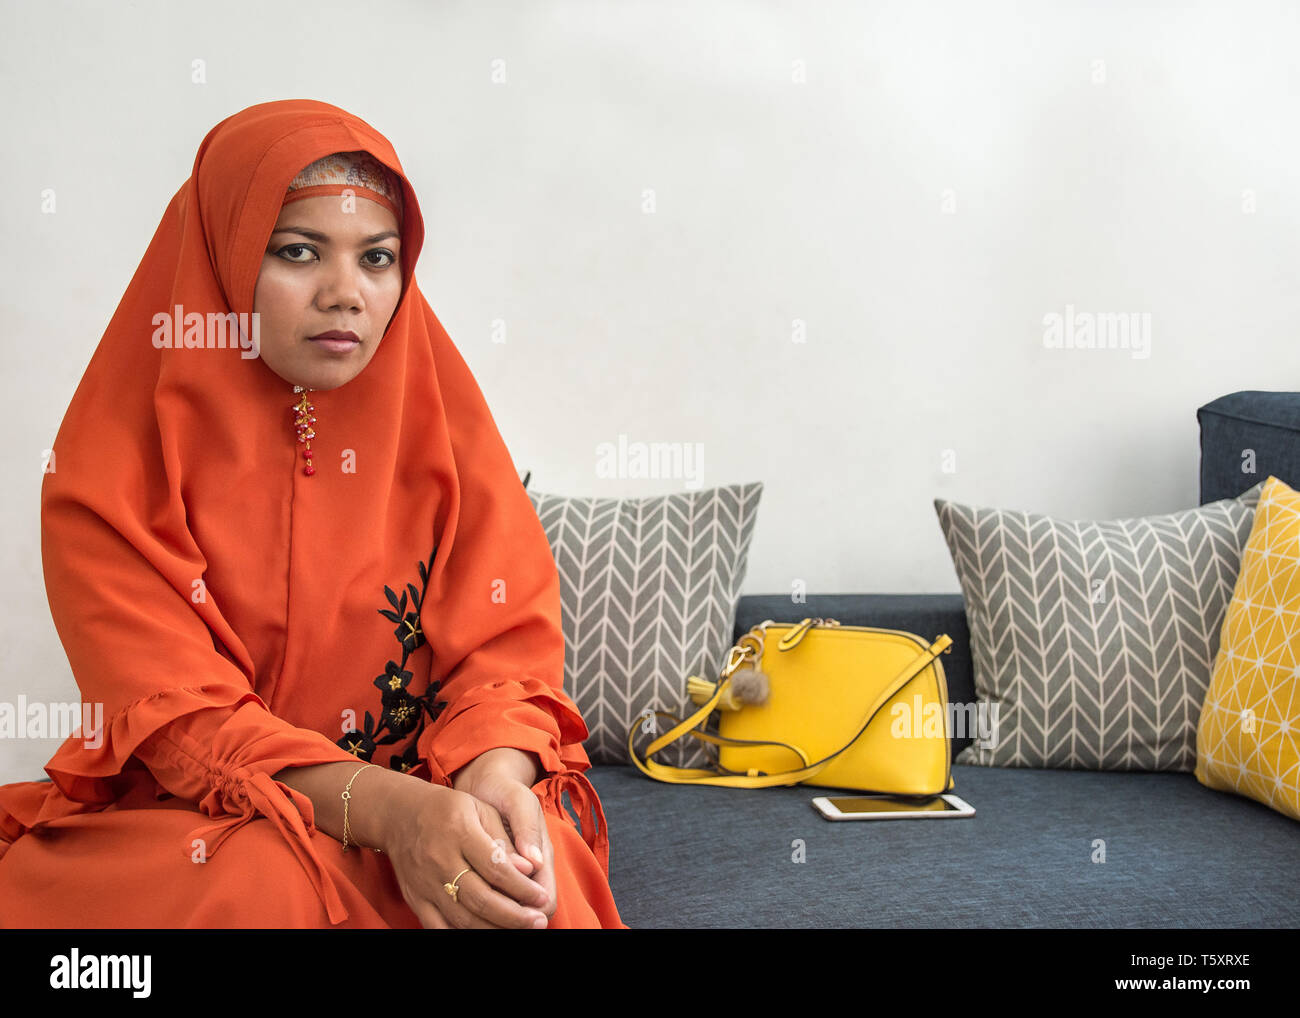 Asian woman wearing hijab orange costume sitting on sofa looking at camera. Banque D'Images